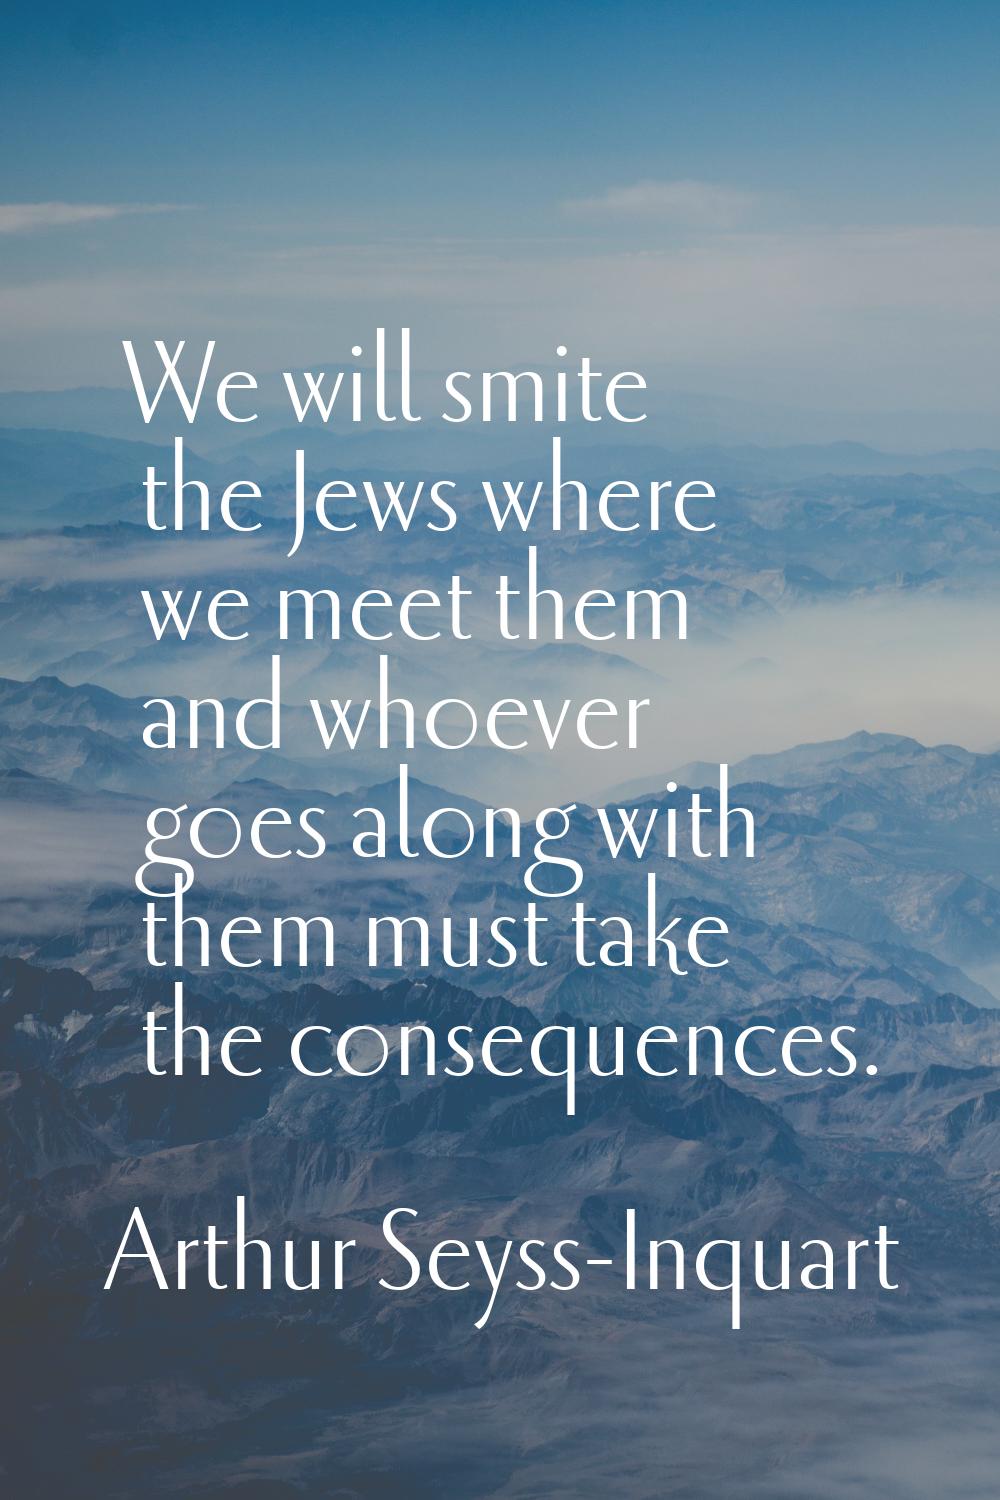 We will smite the Jews where we meet them and whoever goes along with them must take the consequenc